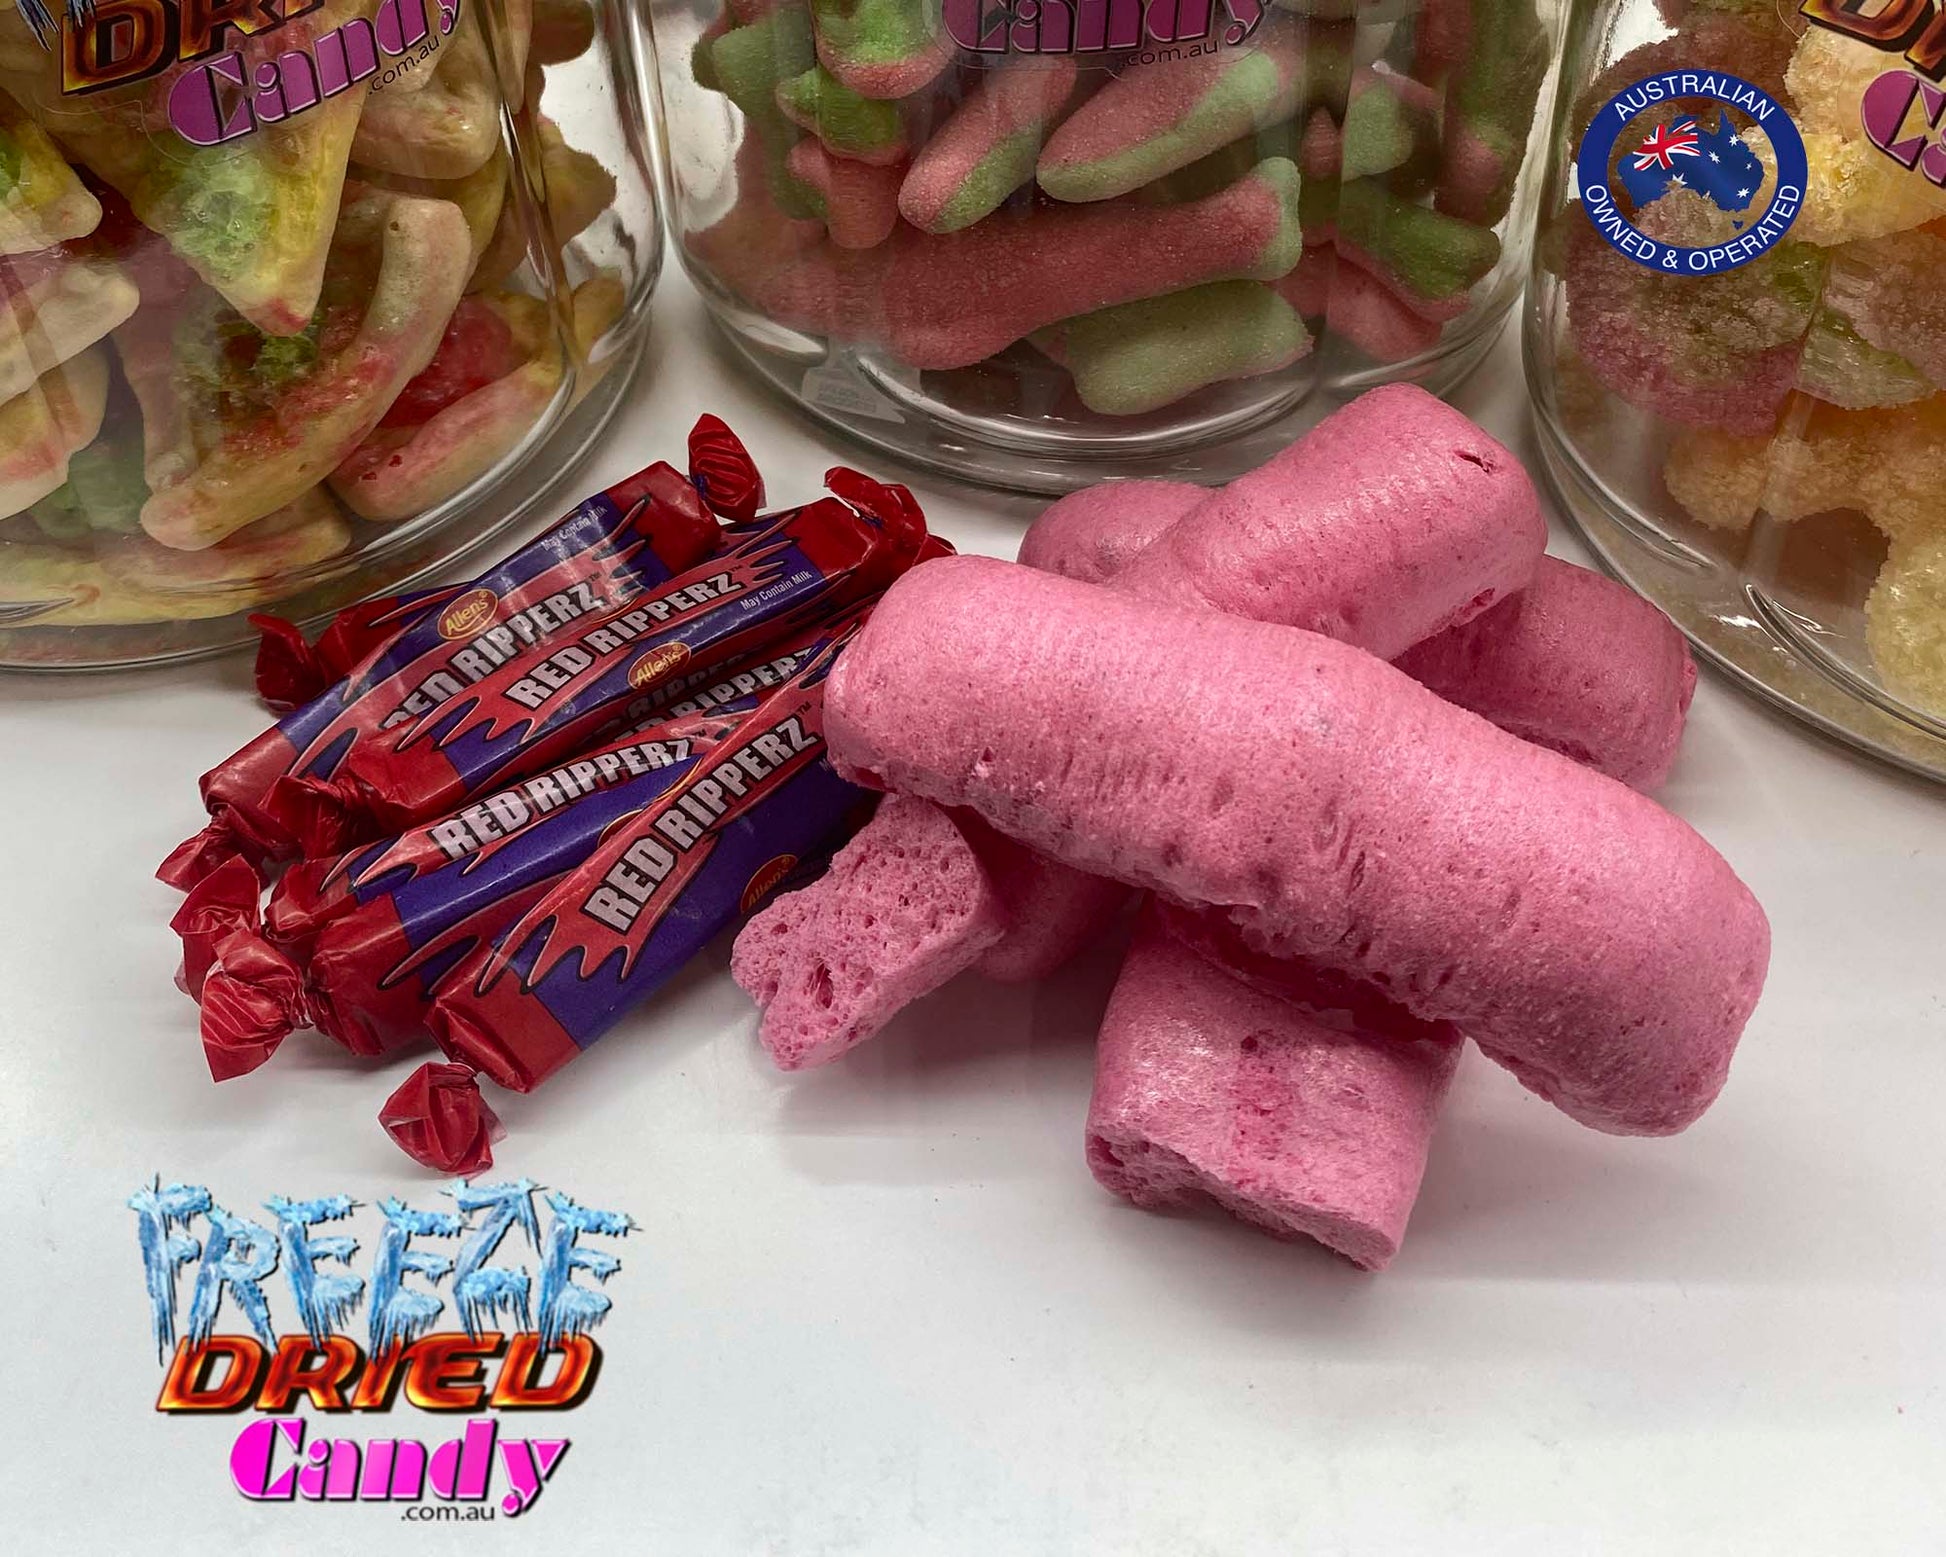 Freeze Dried Red Ripperz - Freeze Dried Candy Lollies Sweets & treats 